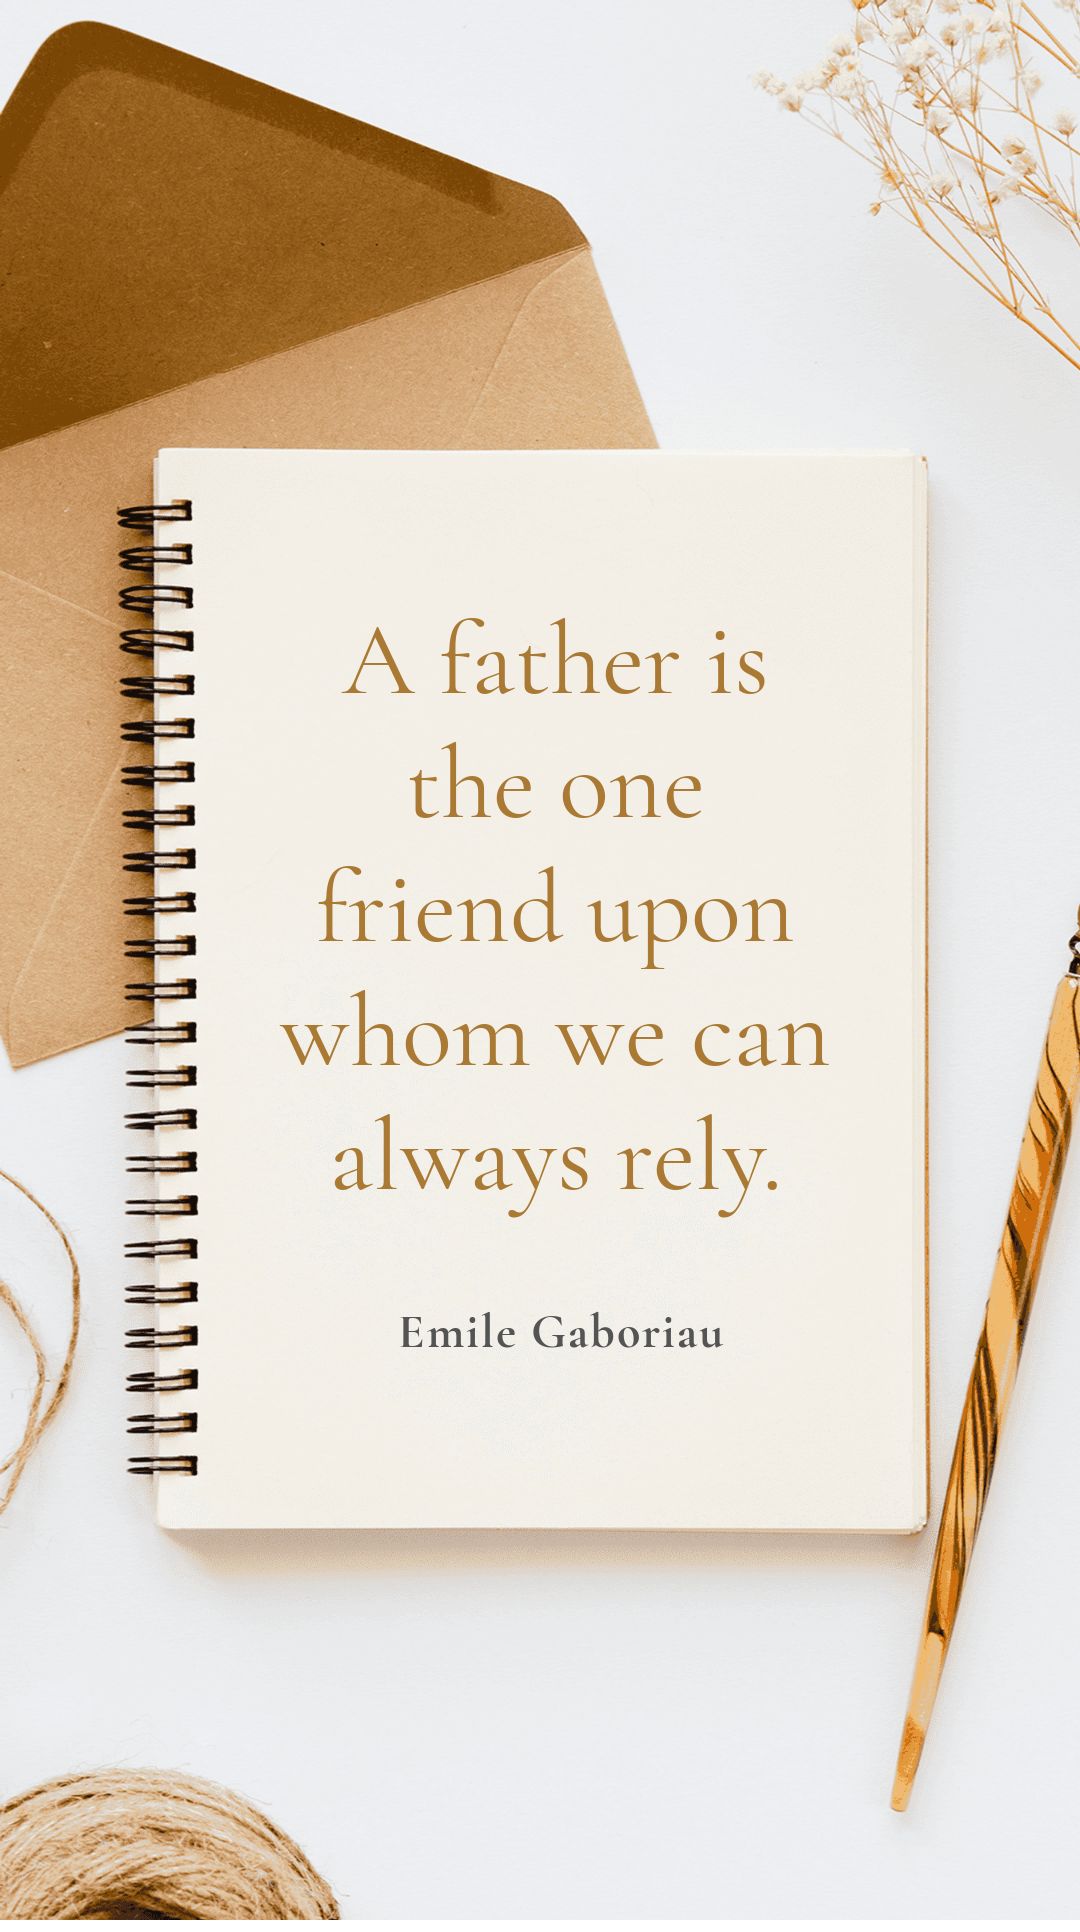 Free Emile Gaboriau - A father is the one friend upon whom we can always rely.